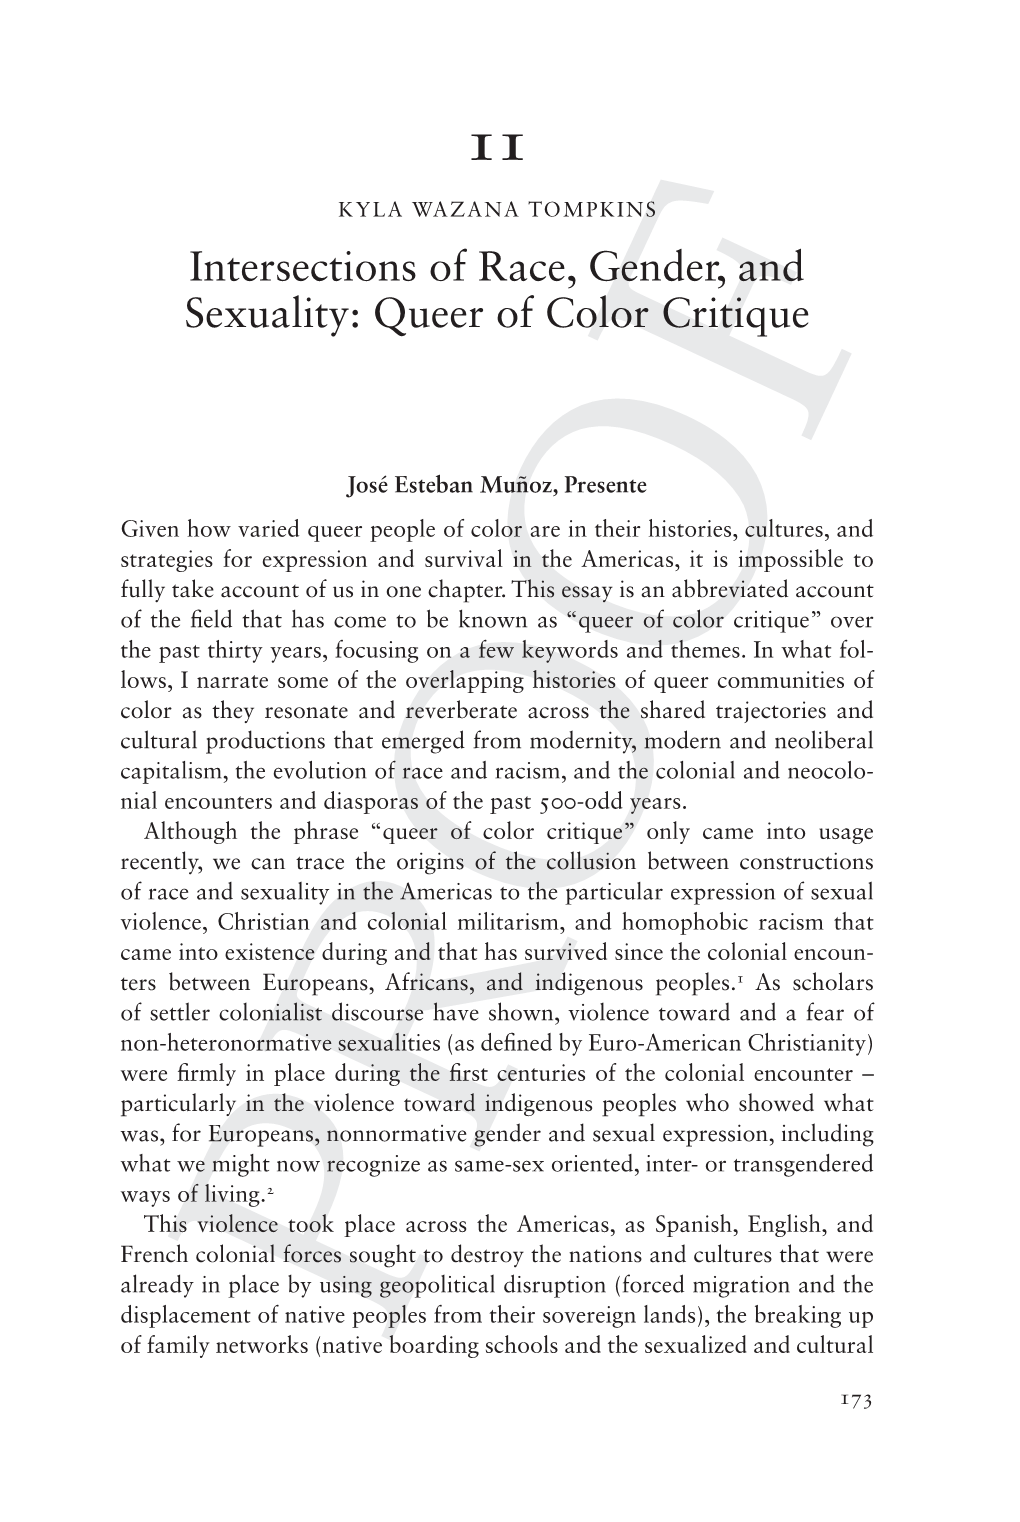 Intersections of Race, Gender, and Sexuality: Queer of Color Critique